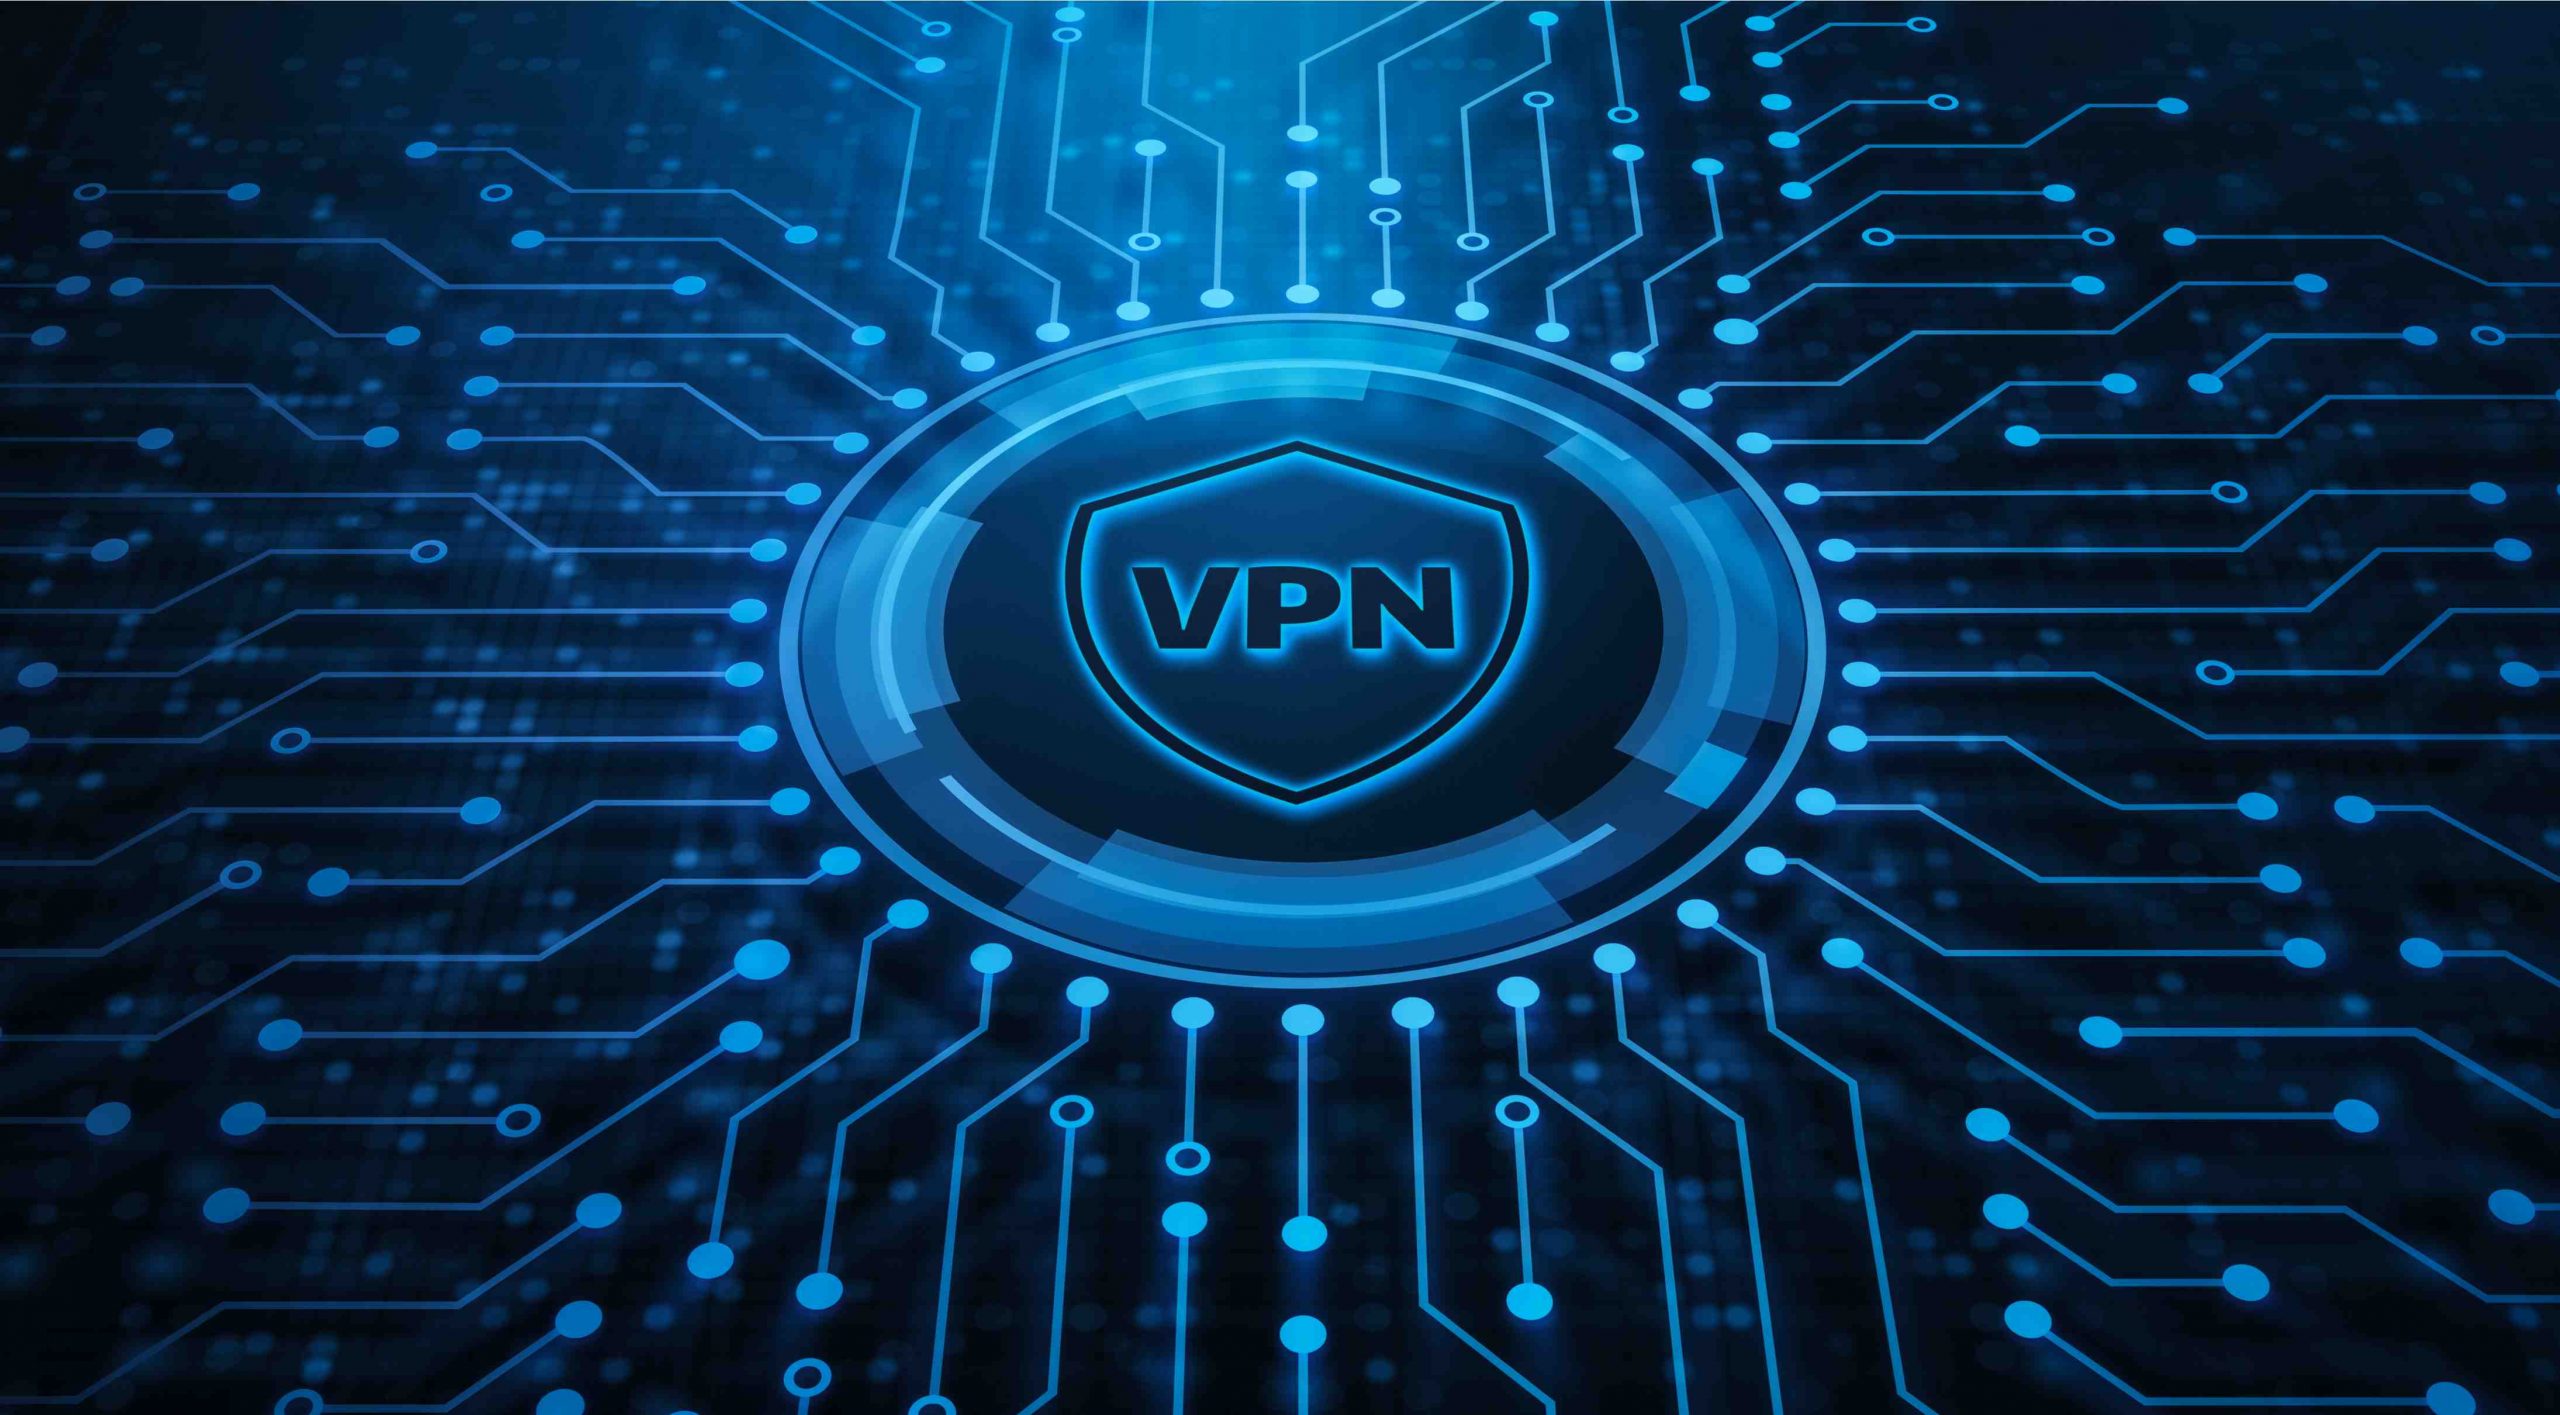 How can I use VPN without being detected?